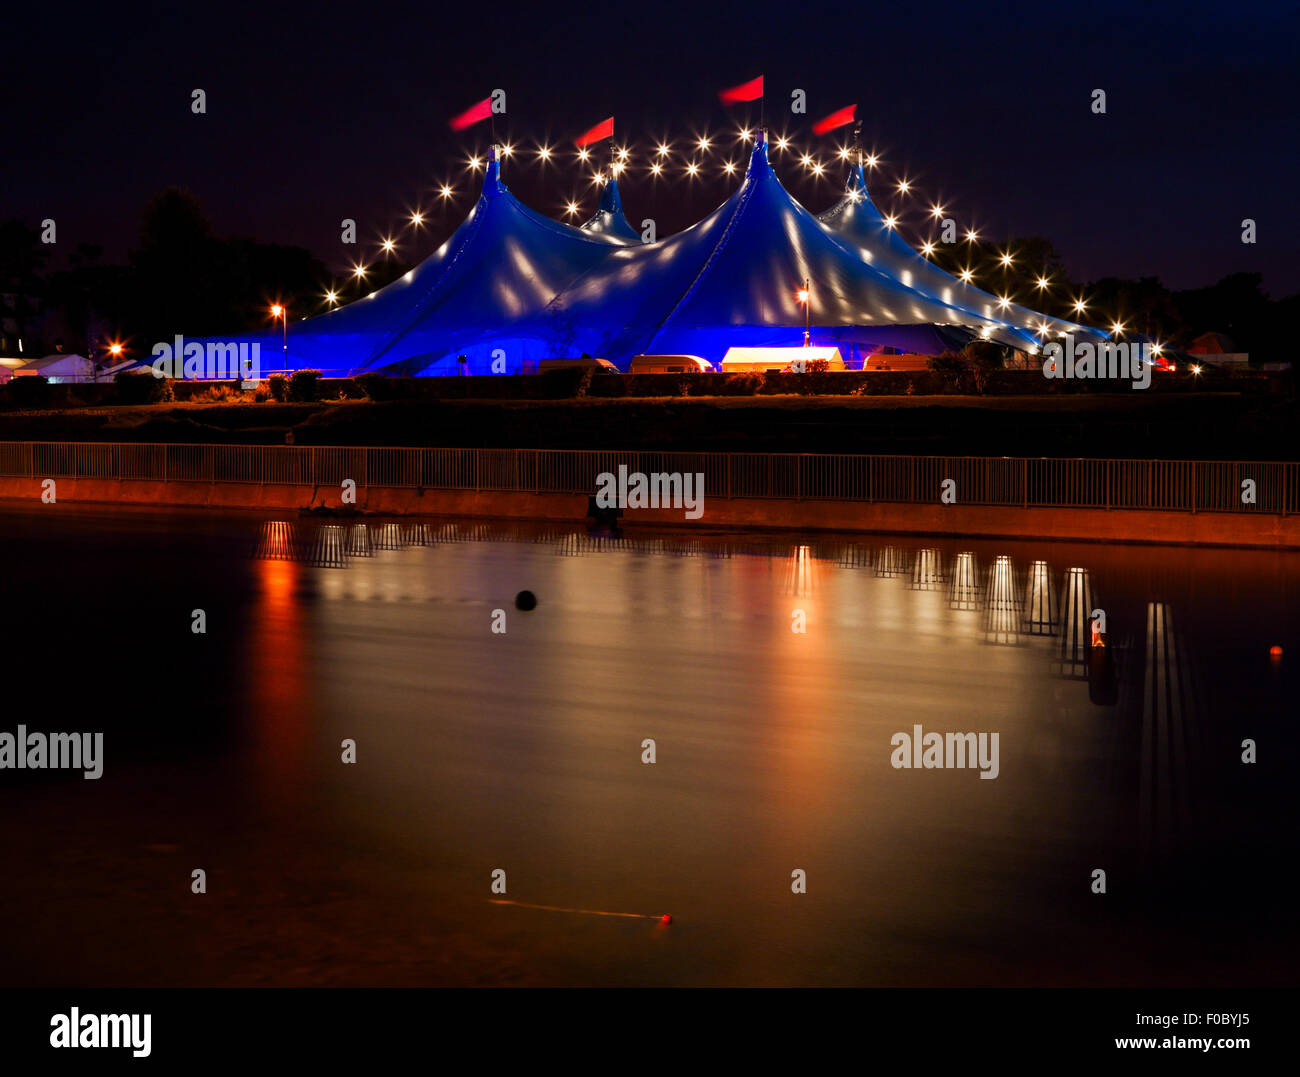 'Big Top' circus style blue tent and row of lights on the bank of Corrib river in Galway, Ireland Stock Photo